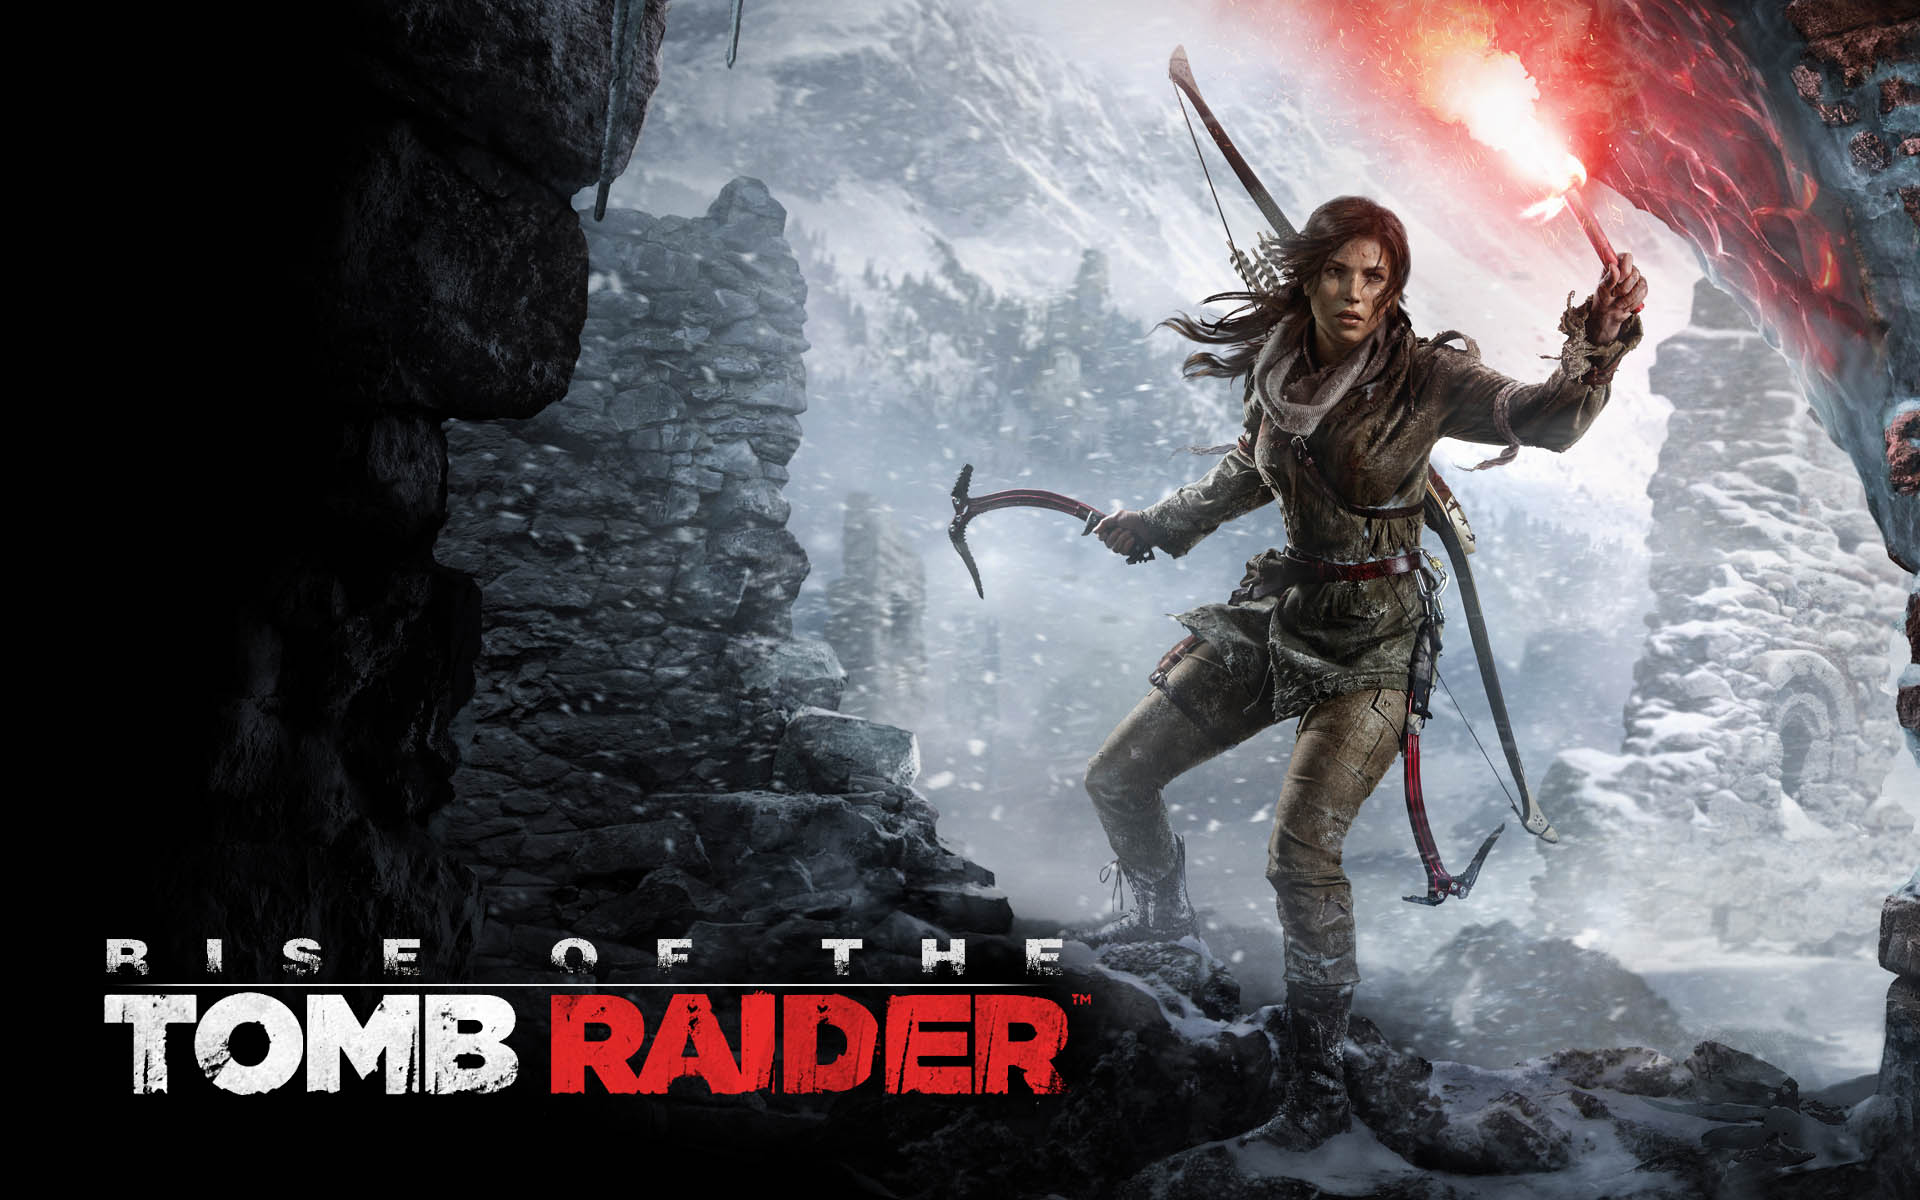 rise of the tomb raider AMD RYZEN 7 2700 and StoreMI Technology Review